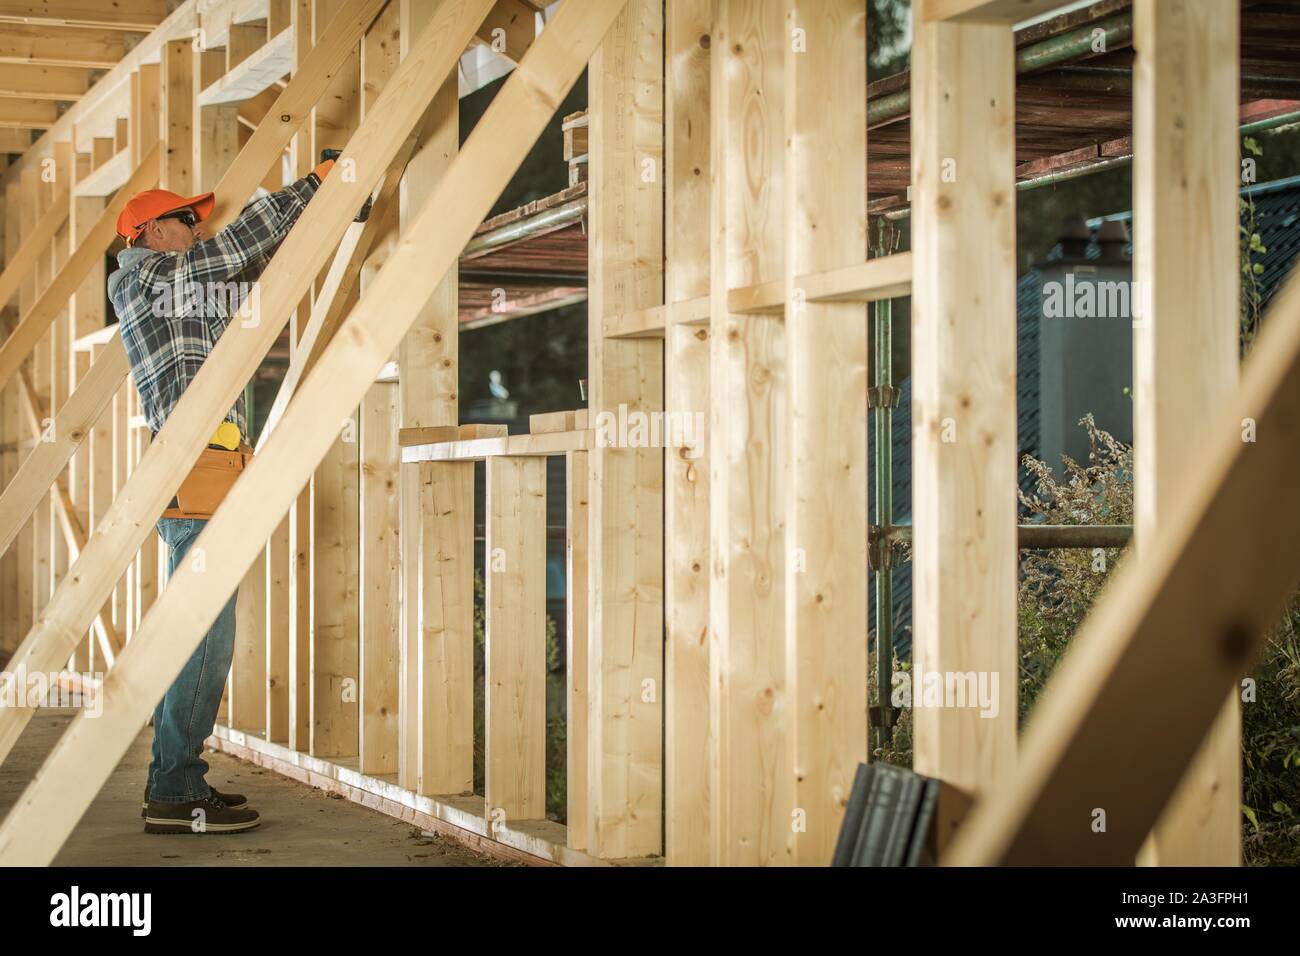 Wooden House Construction Job. Caucasian Contractor Carpenter Finishing Building wood Beams Frame. Industrial Theme. Stock Photo